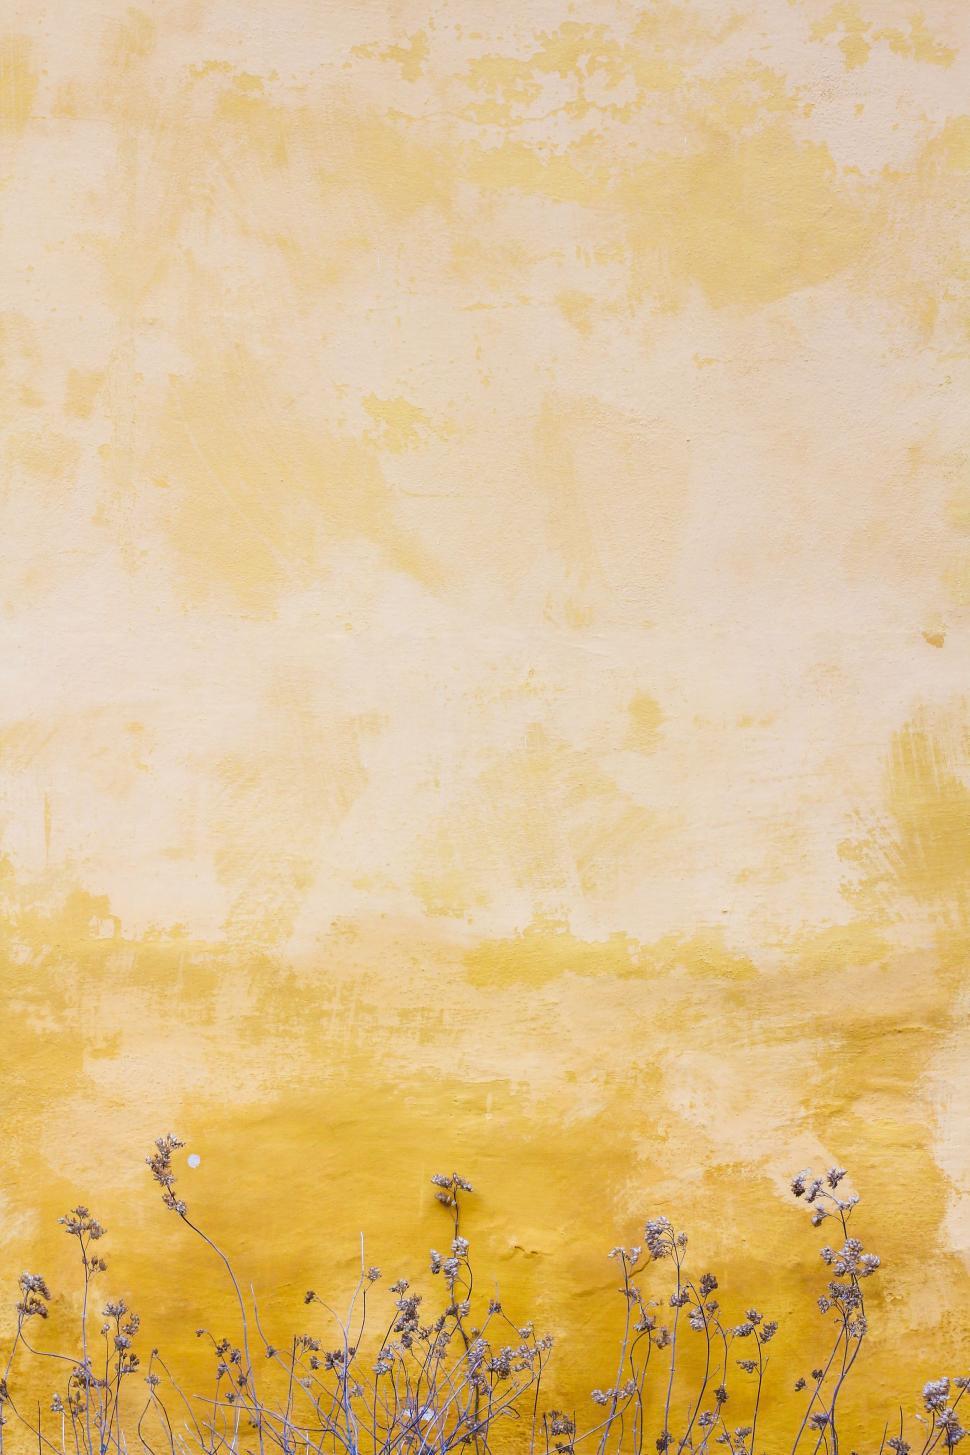 Free Image of Yellow and White Flowers in Front of a Yellow Wall 